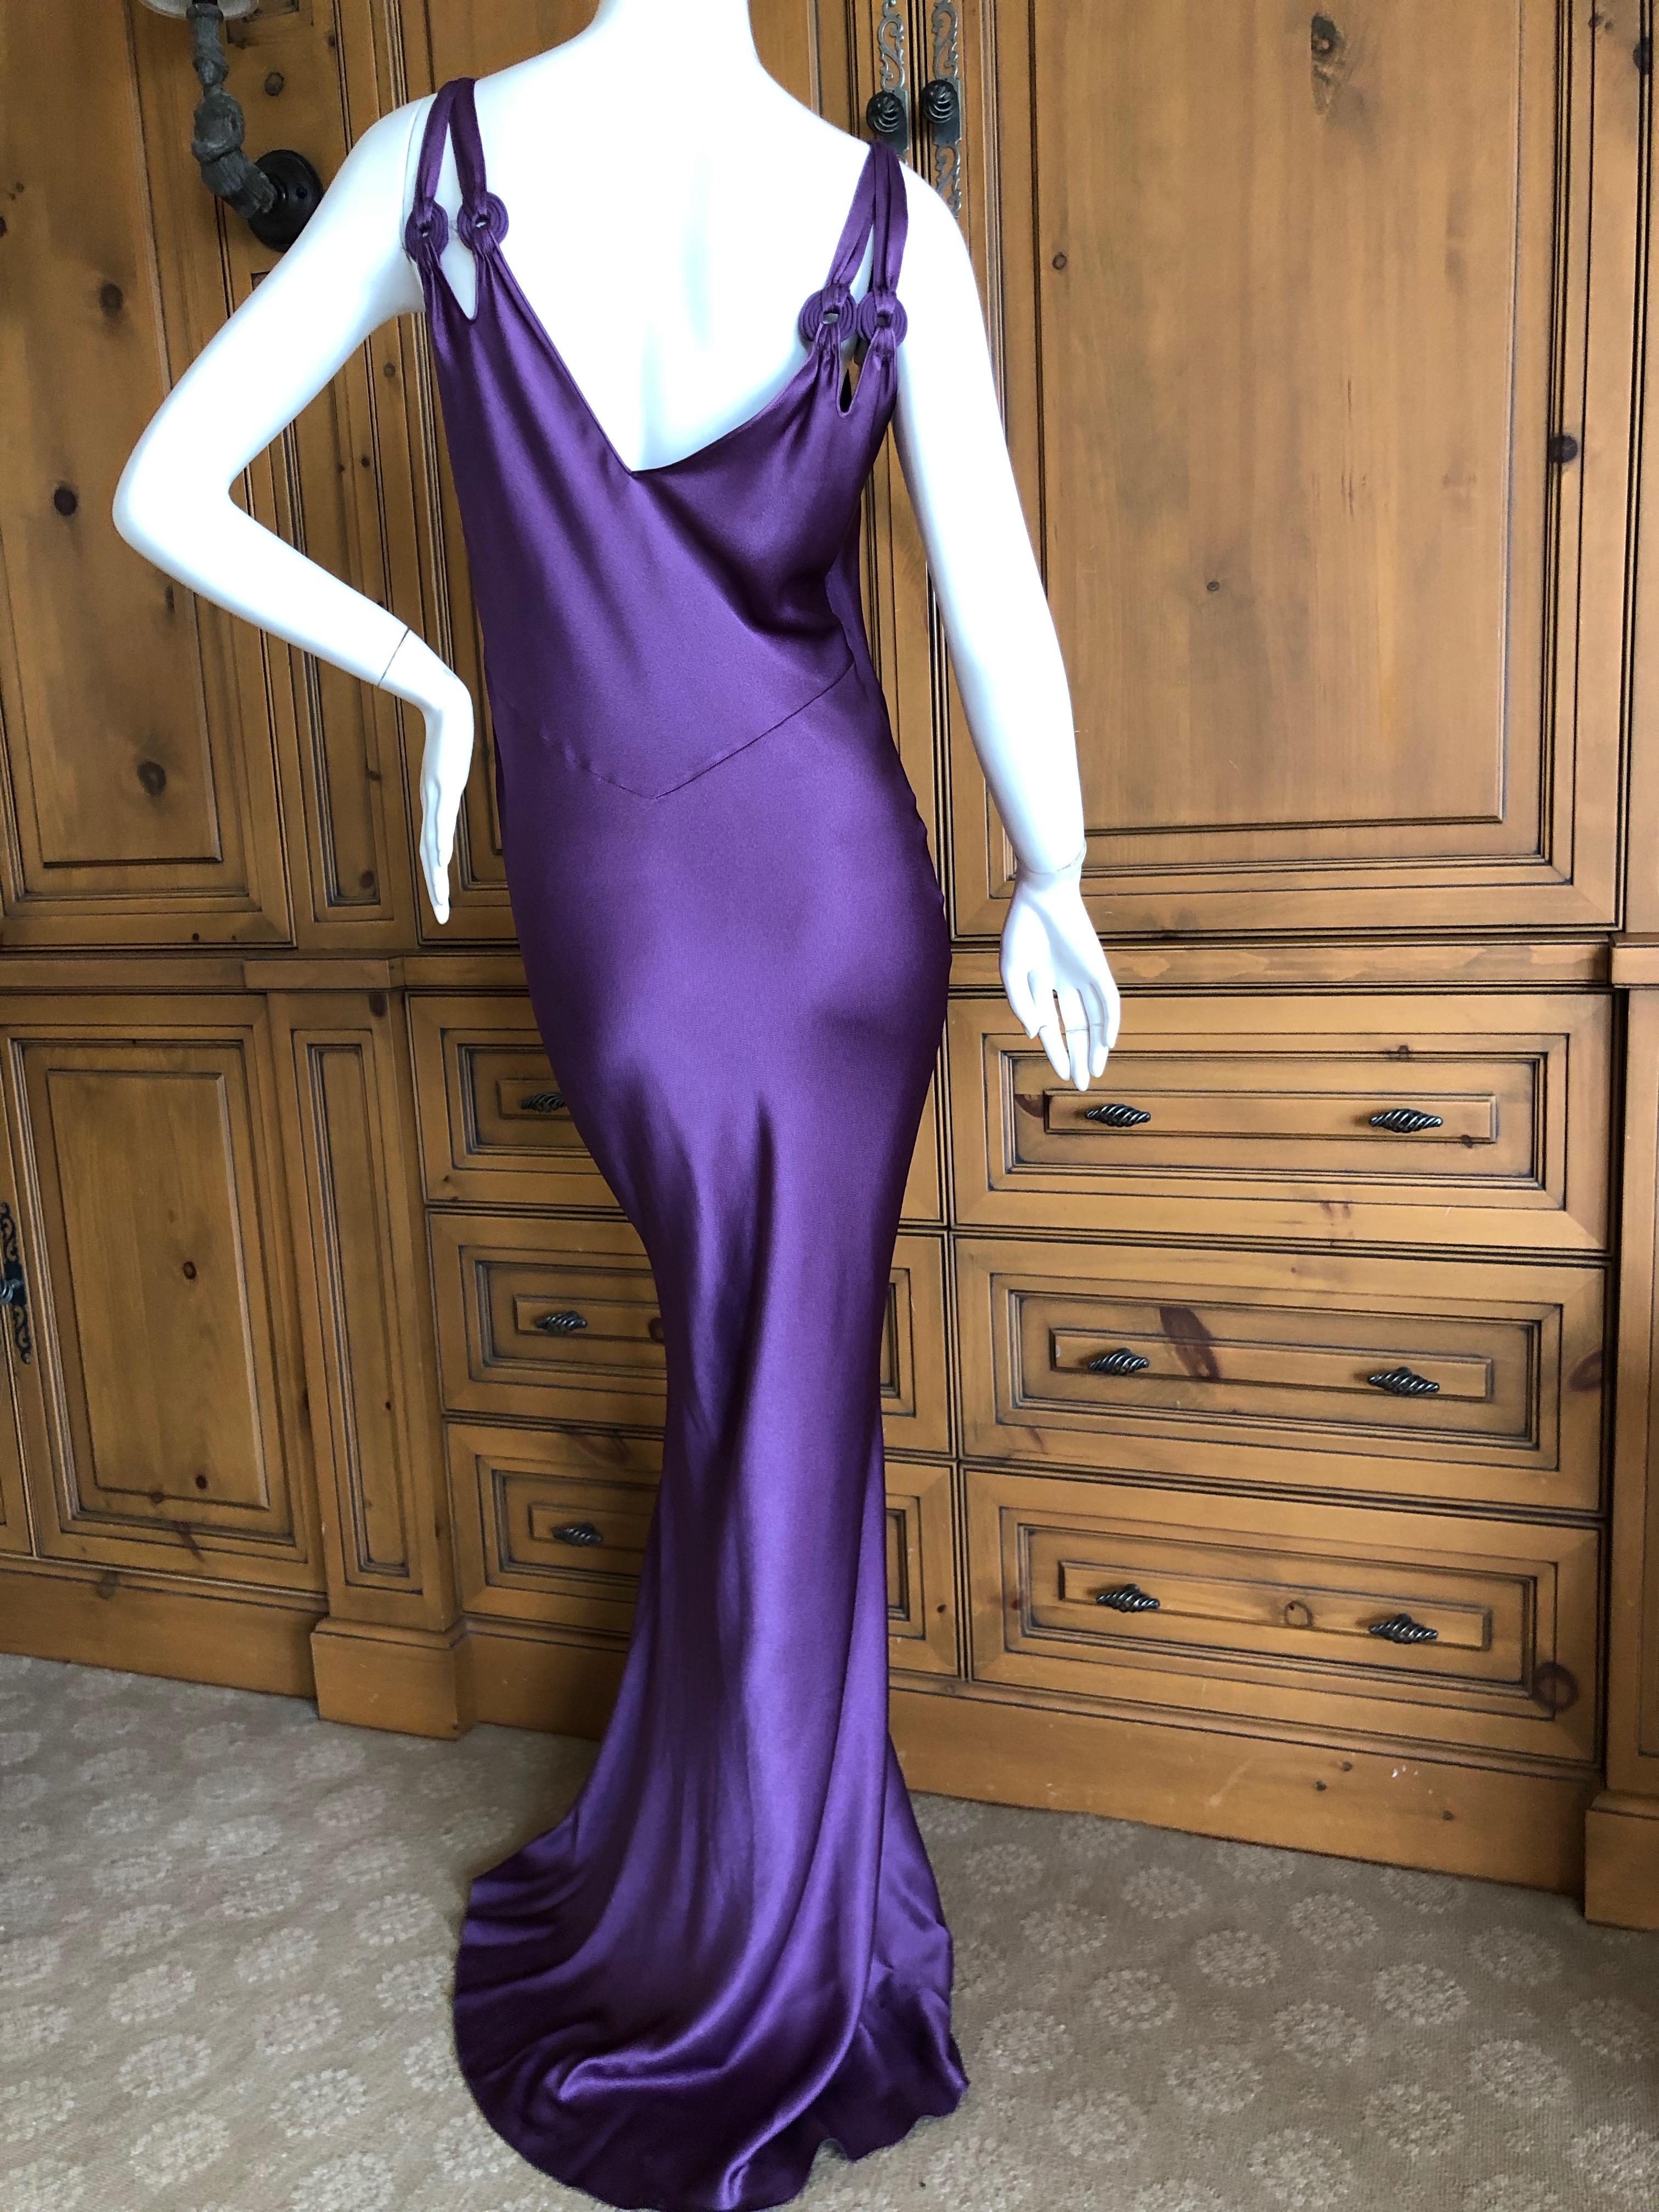 John Galliano Late 90's Luscious Rich Purple Bias Cut Evening Dress .
Cut on the bias, this has a lot of stretch, and will hug your curves in all the right places
Size 42
Bust 40